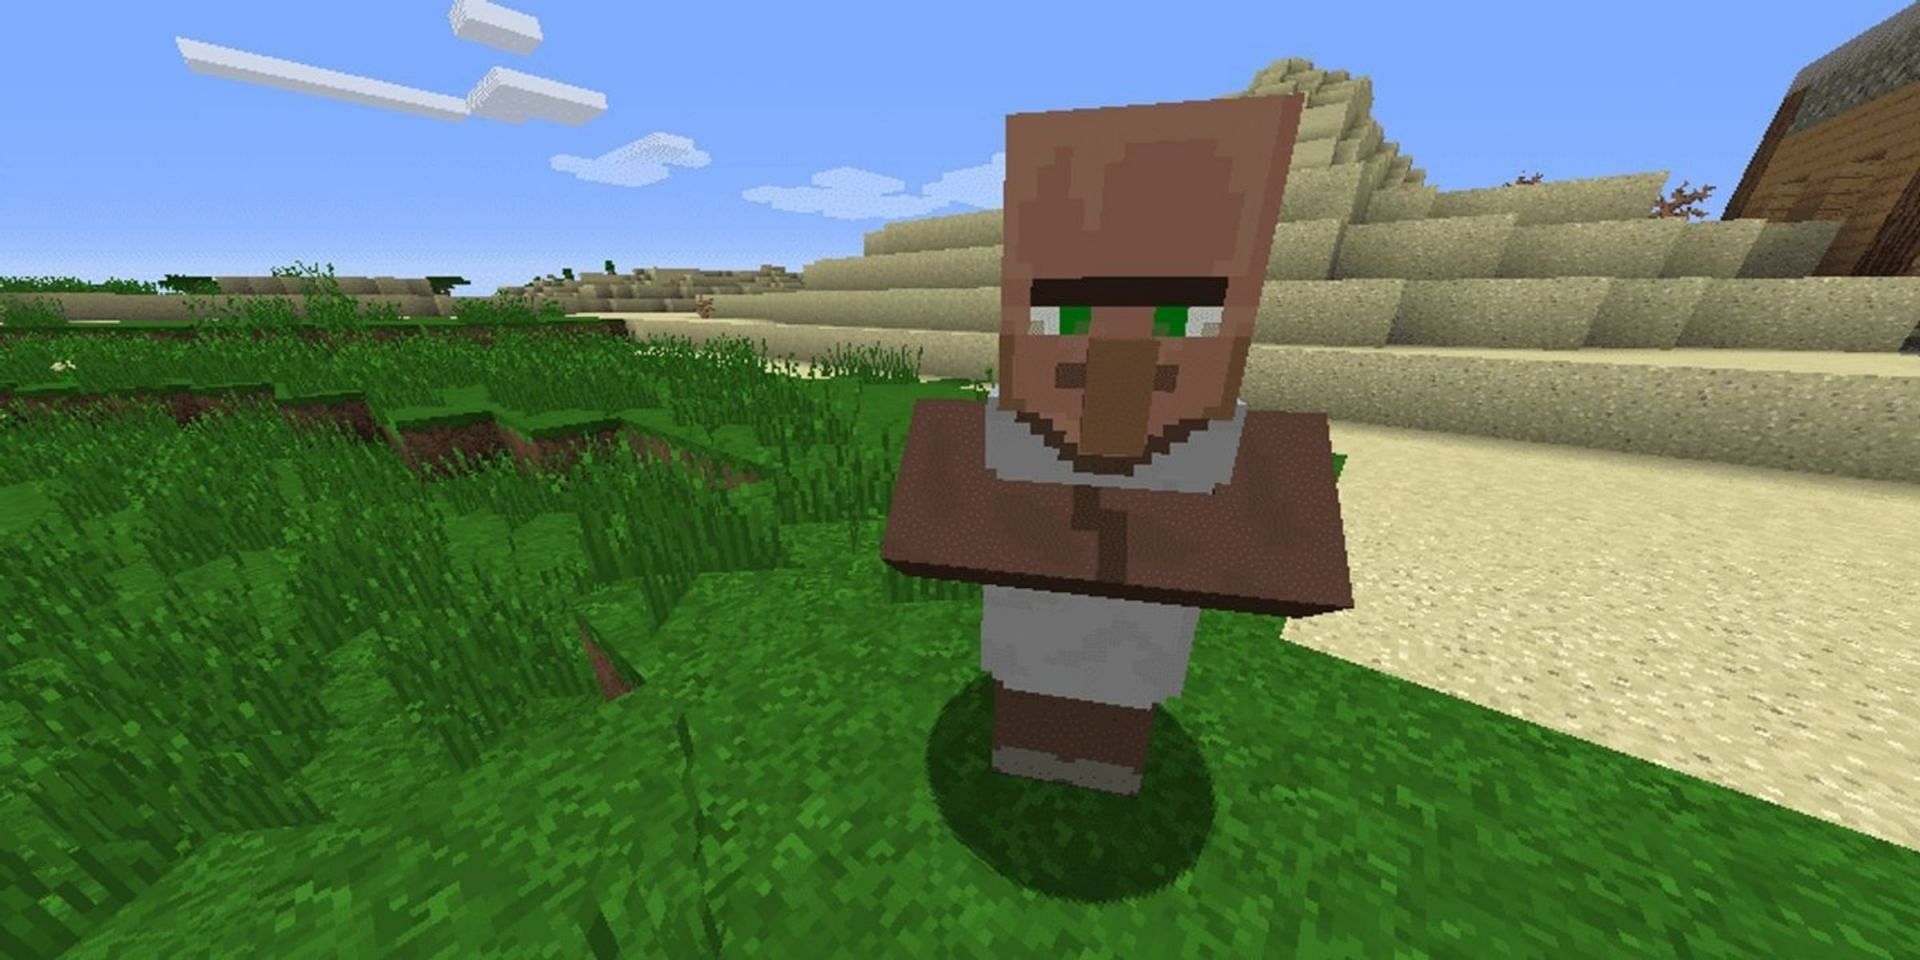 Villagers can equip armor in Minecraft for protection, though it won&#039;t be visible (Image via Mojang)